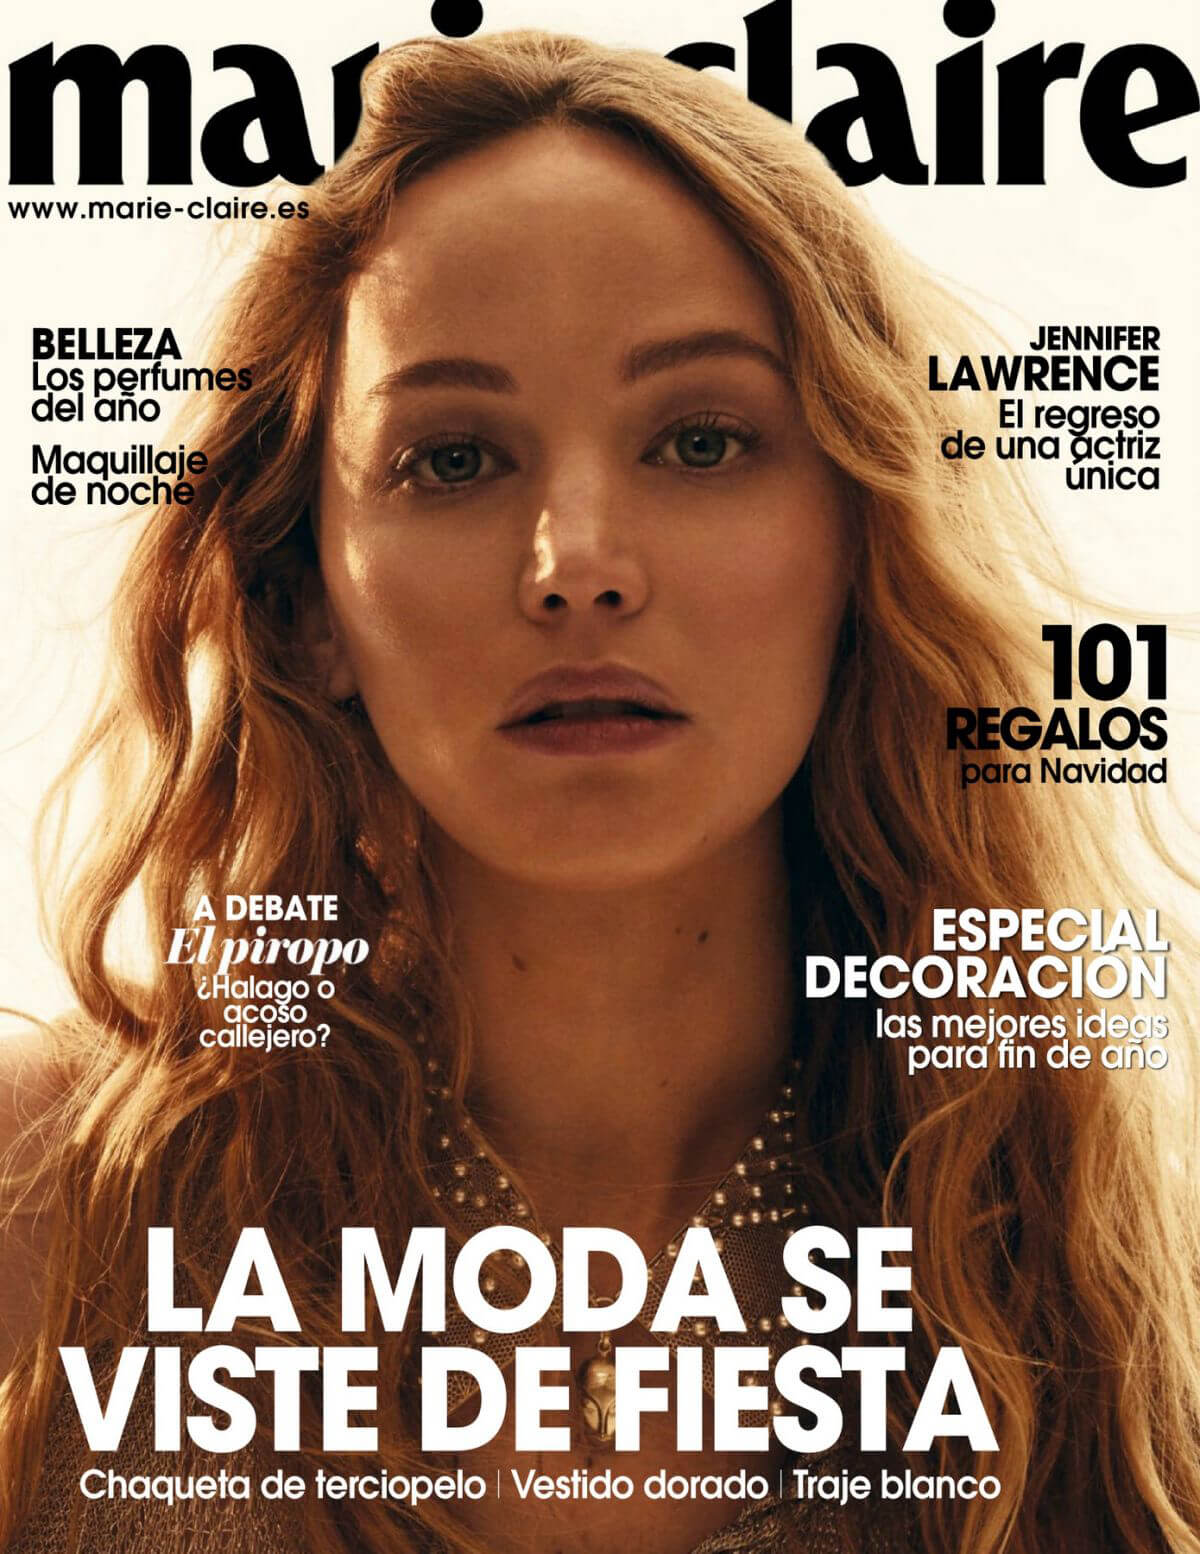 Jennifer Lawrence Photoshoot in Marie Claire Magazine, Spain December 2021